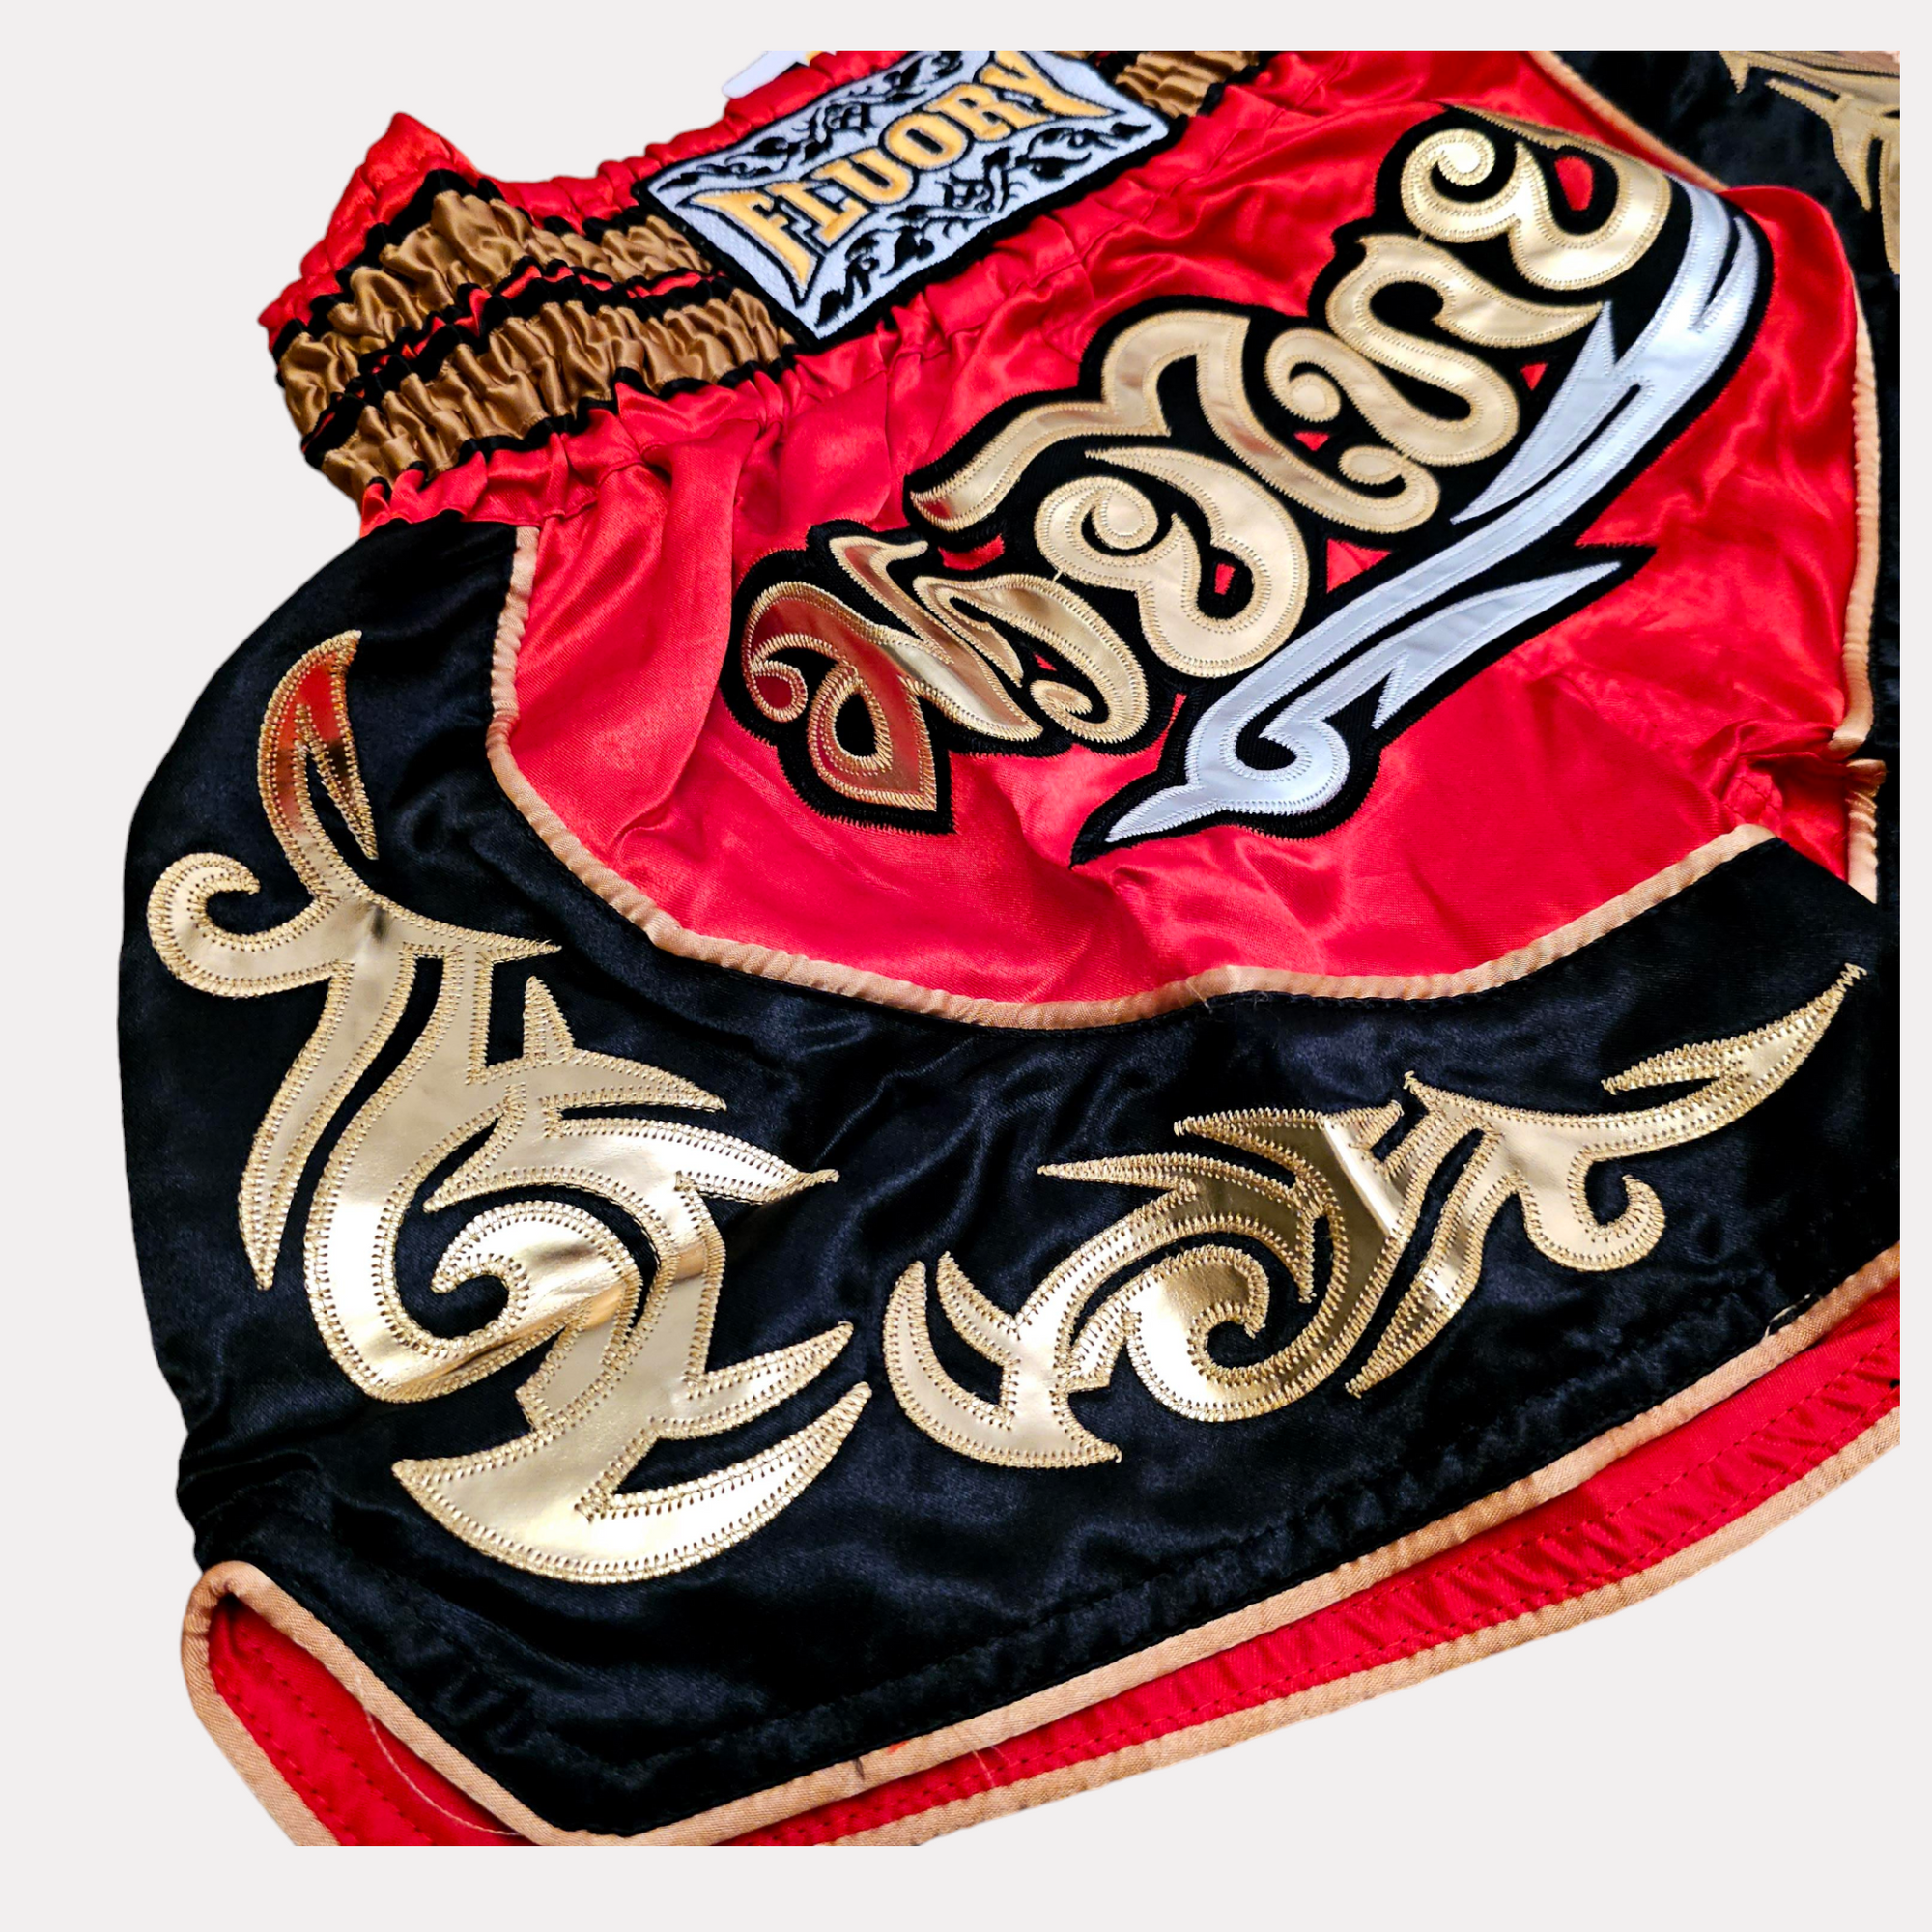 Fluory Tribal Adult Muay Thai Shorts - Fight Co